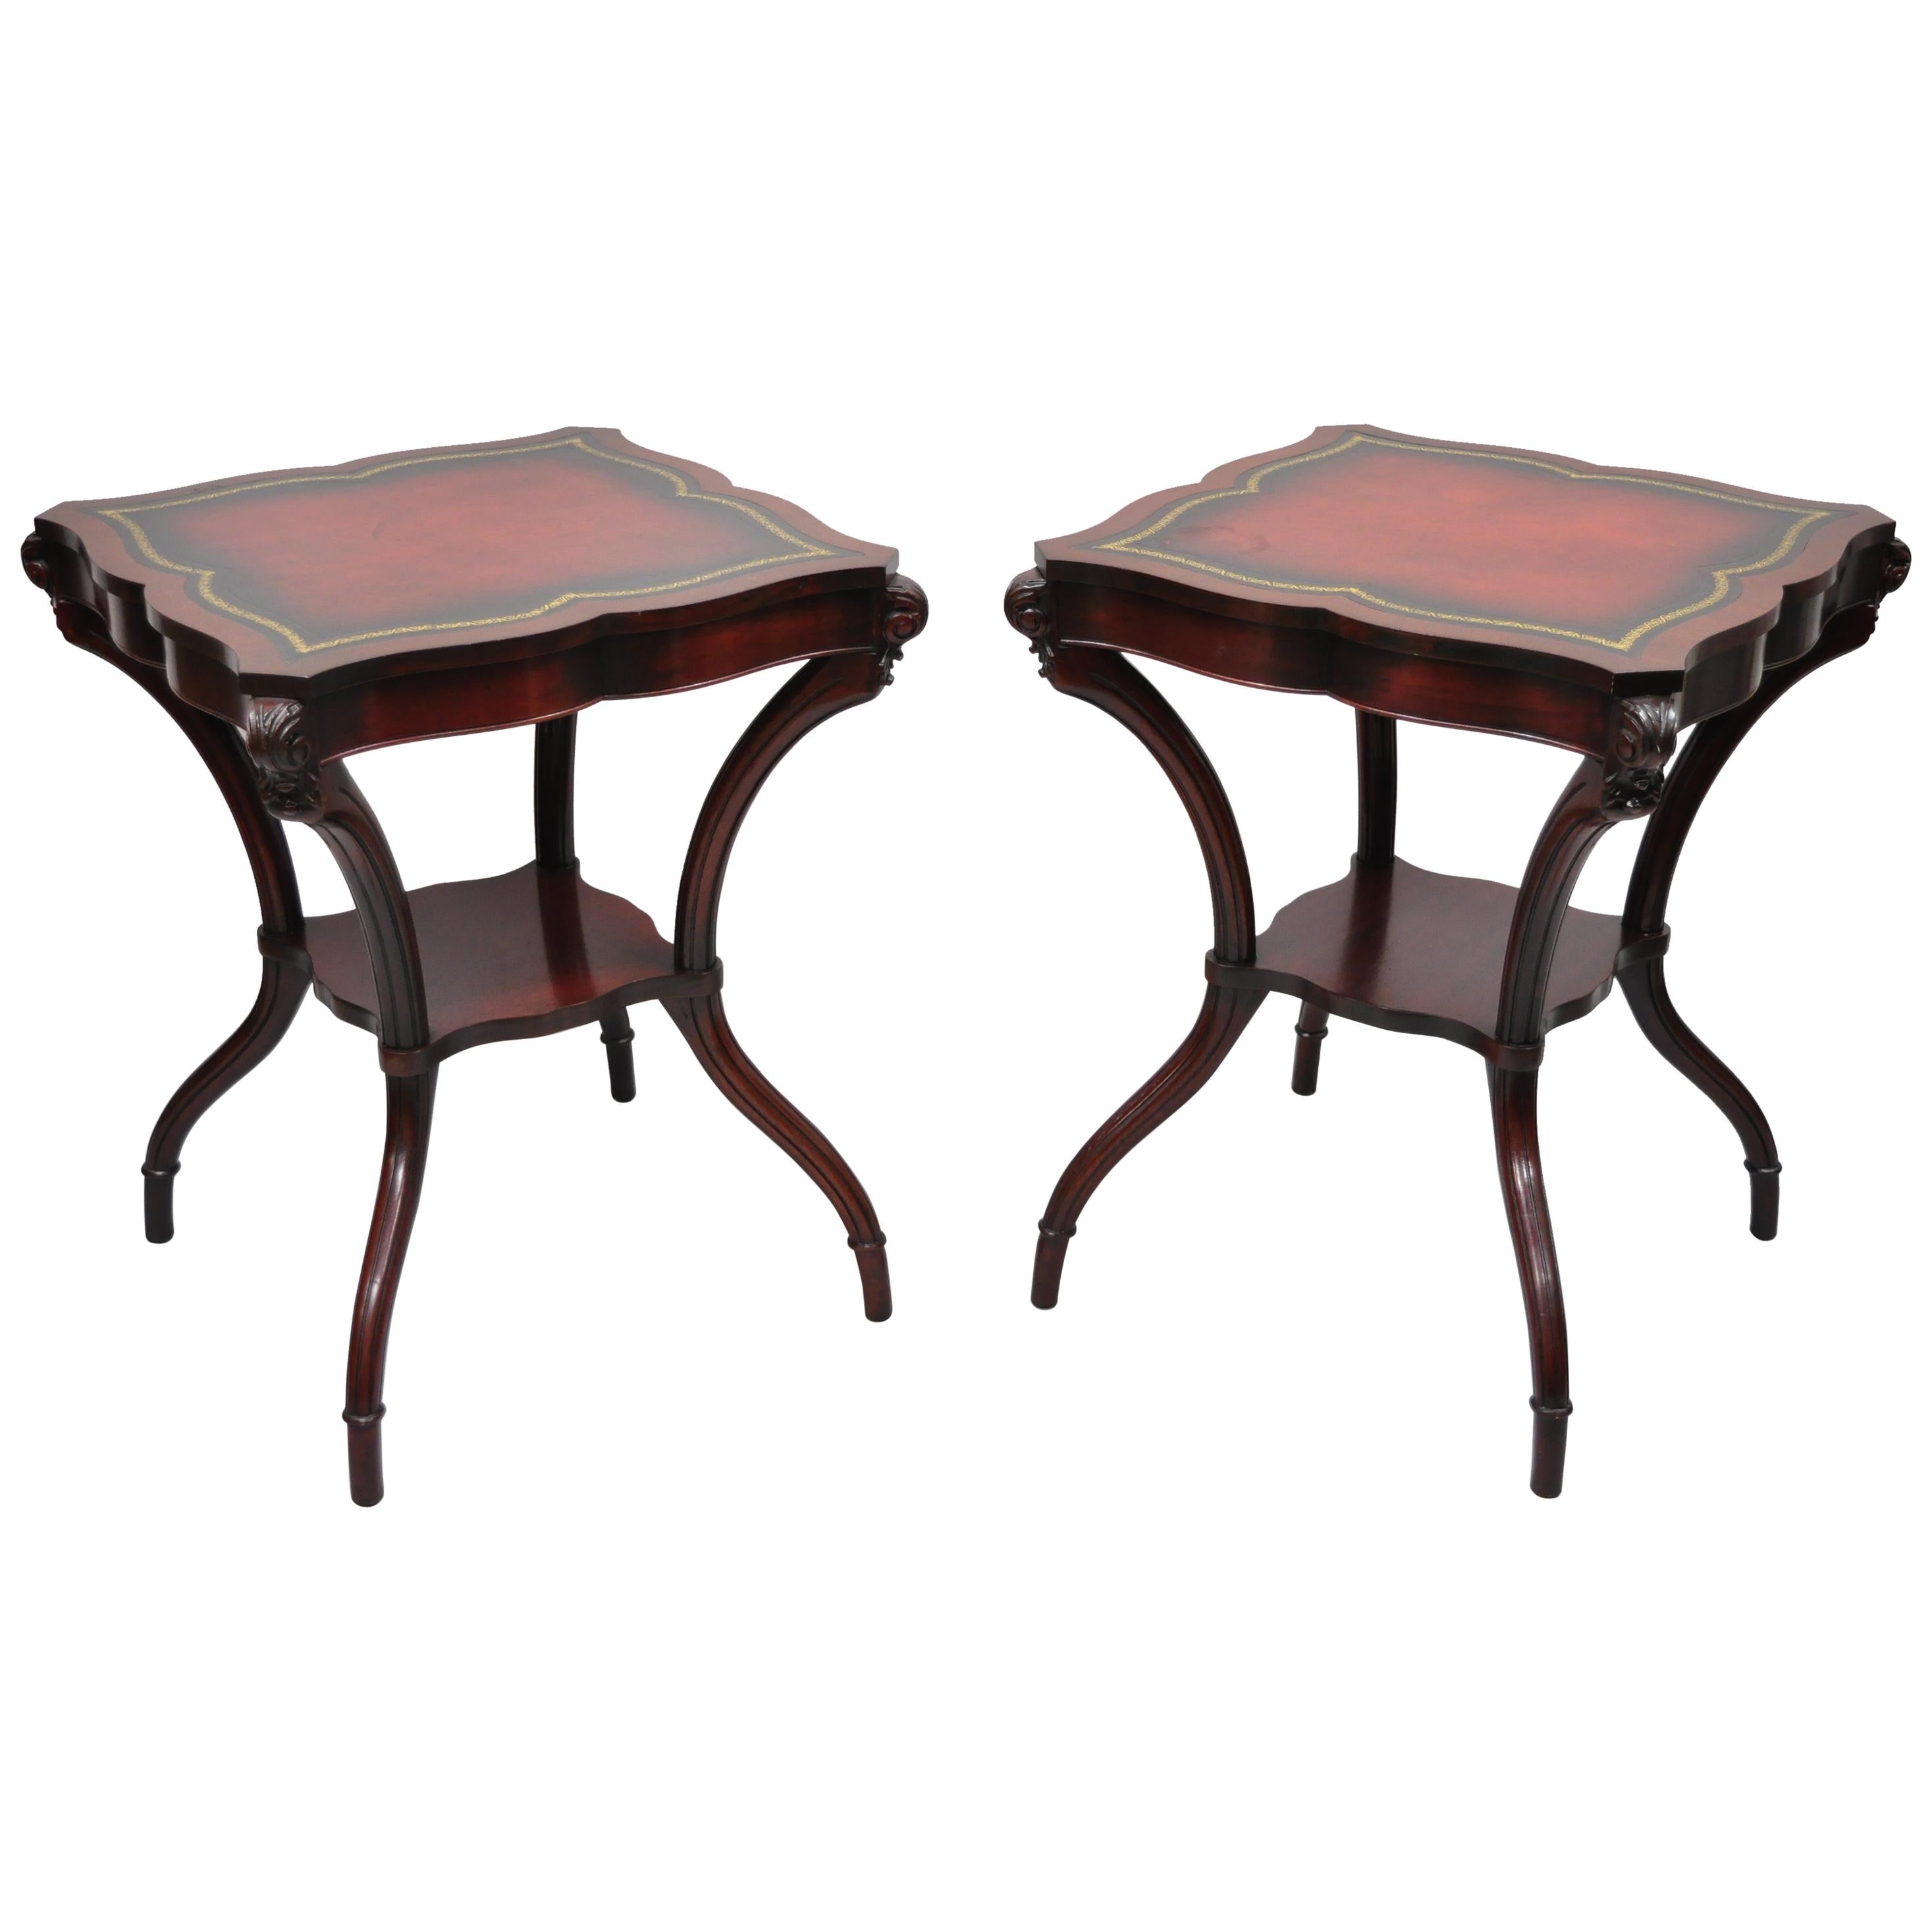 Vintage French Regency Style Red Leather Top Mahogany Lamp End Tables, a  Pair For Sale at 1stDibs | leather top tables, leather top end tables,  leather top side table